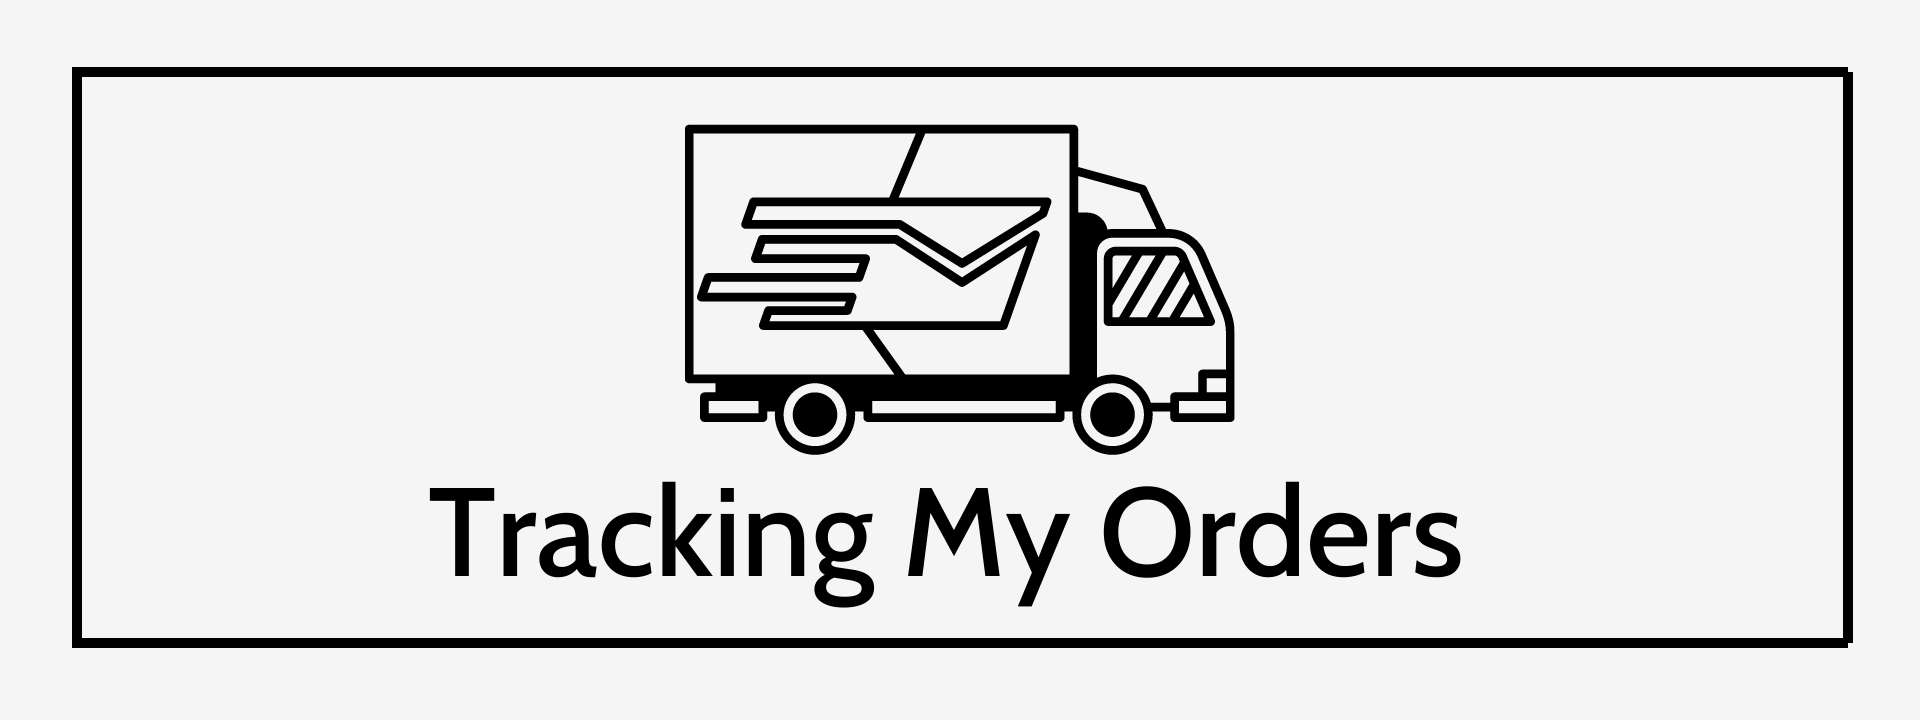 tracking my orders